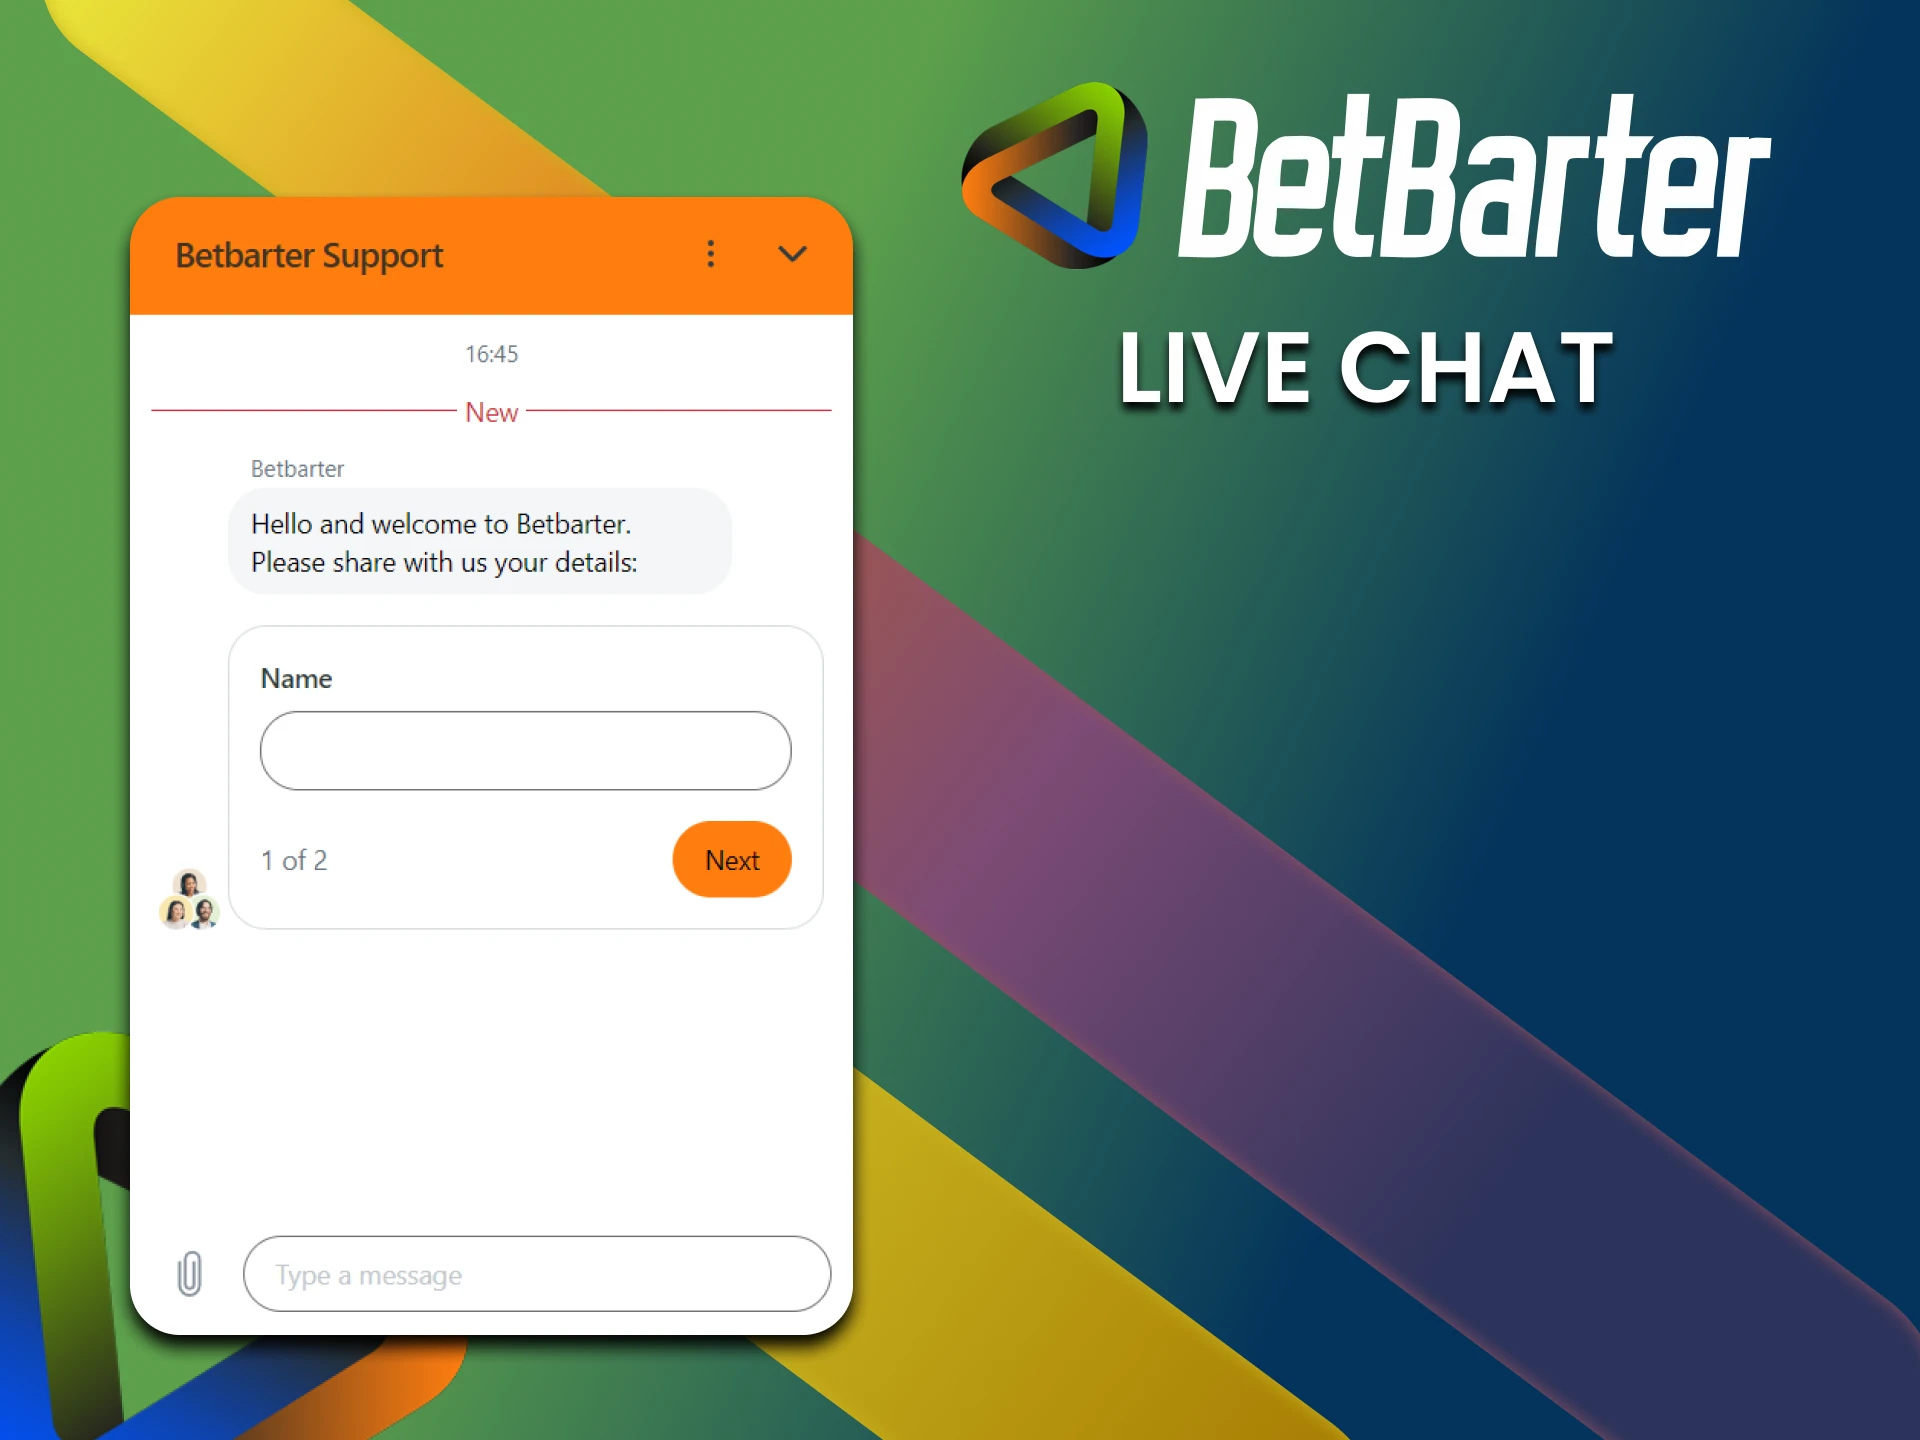 You can contact the BetBarter team via chat.